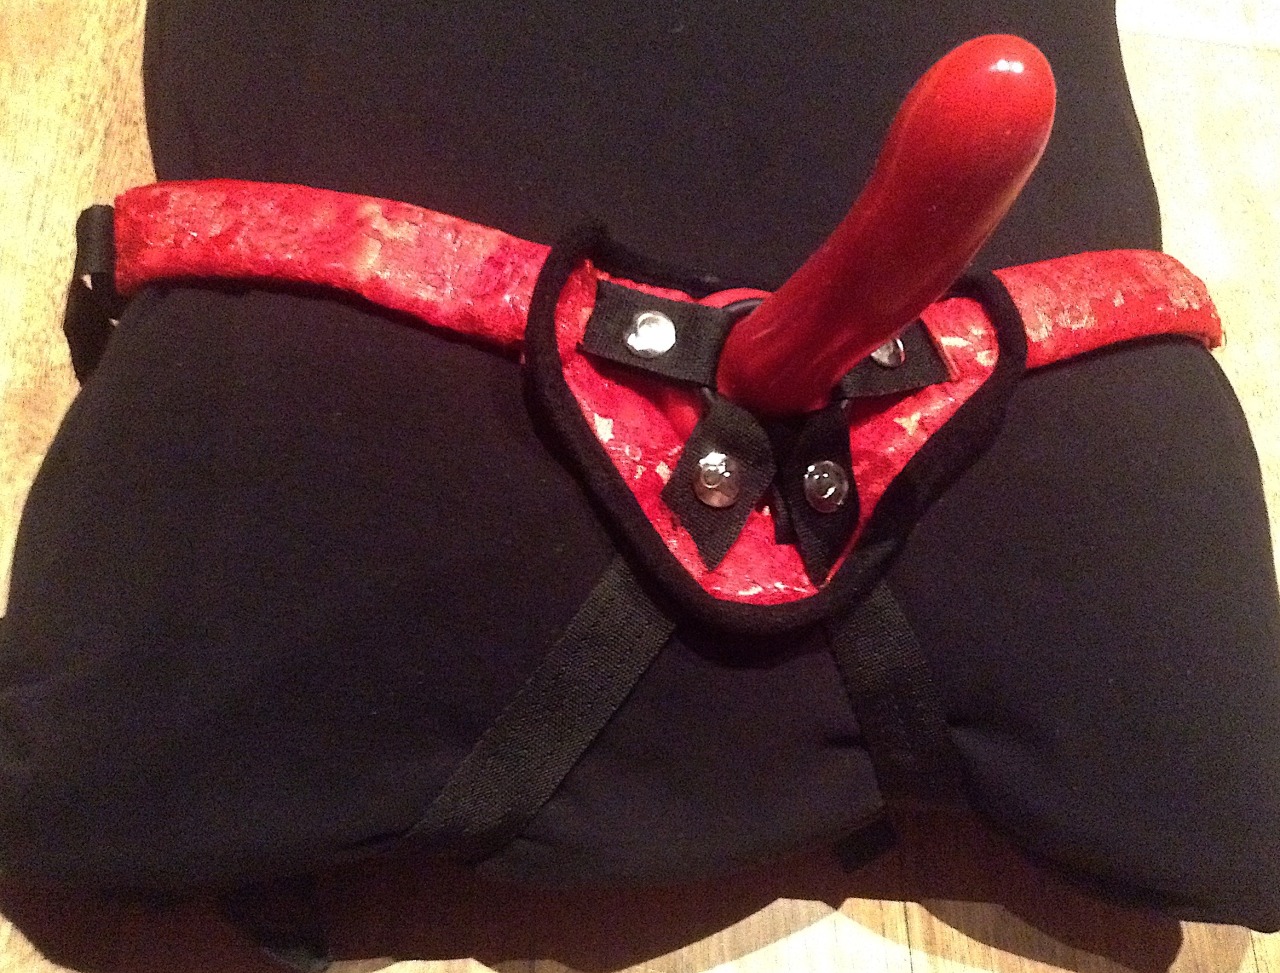 Pillow Princess Reviews — Red Alert a review of the Sportsheets Red Lace...